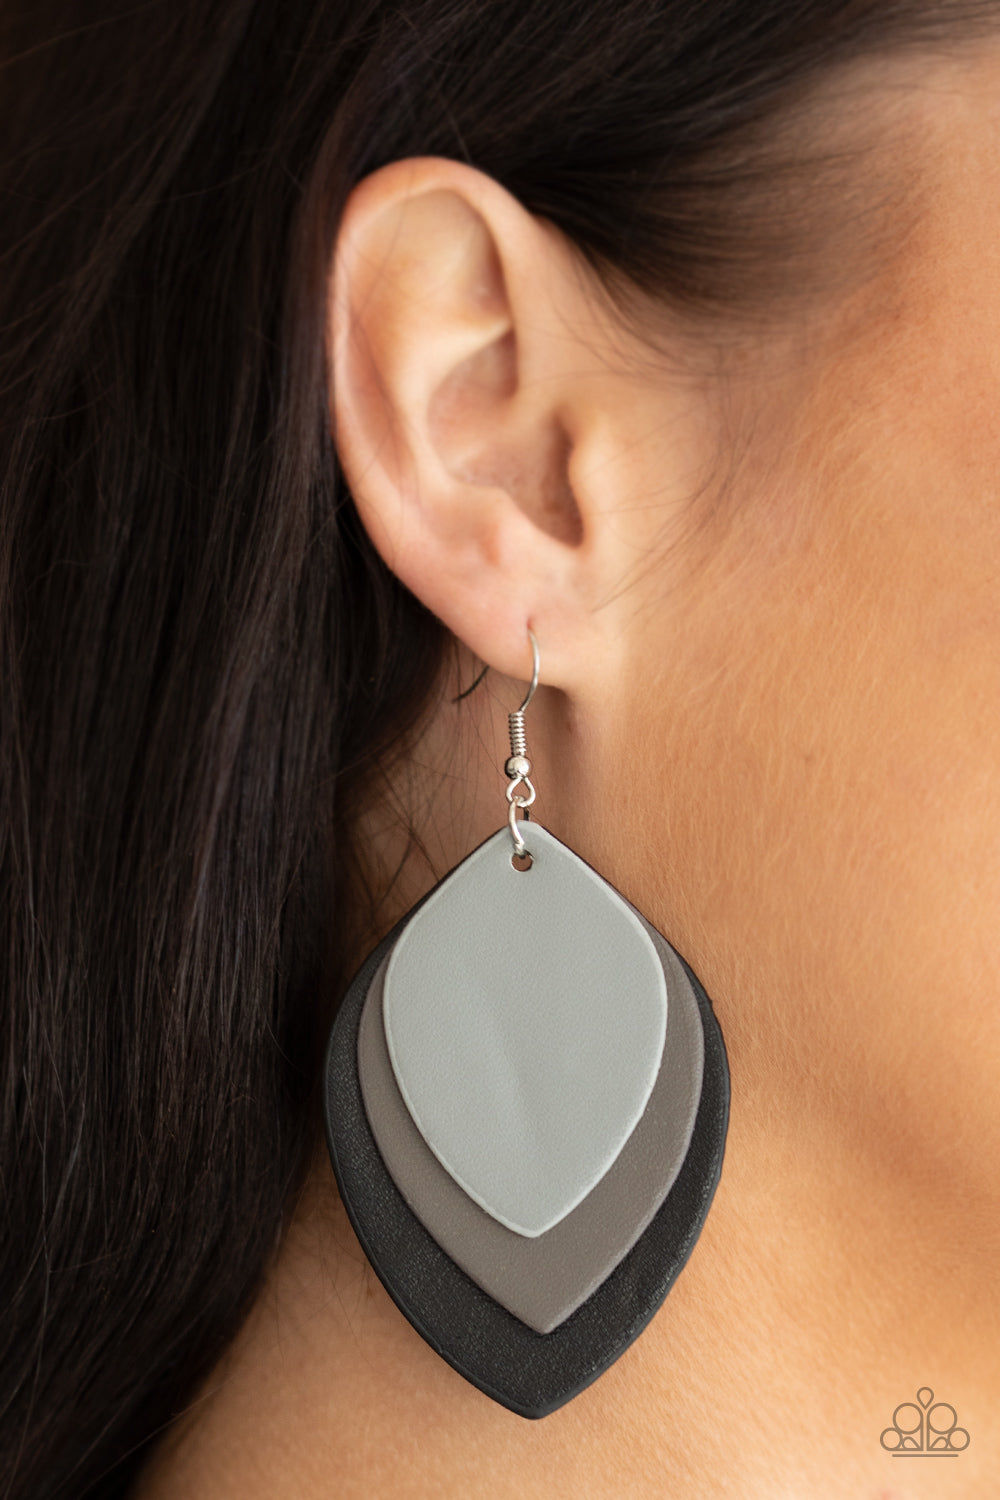 Paparazzi Light as a LEATHER - Black Earrings - A Finishing Touch Jewelry